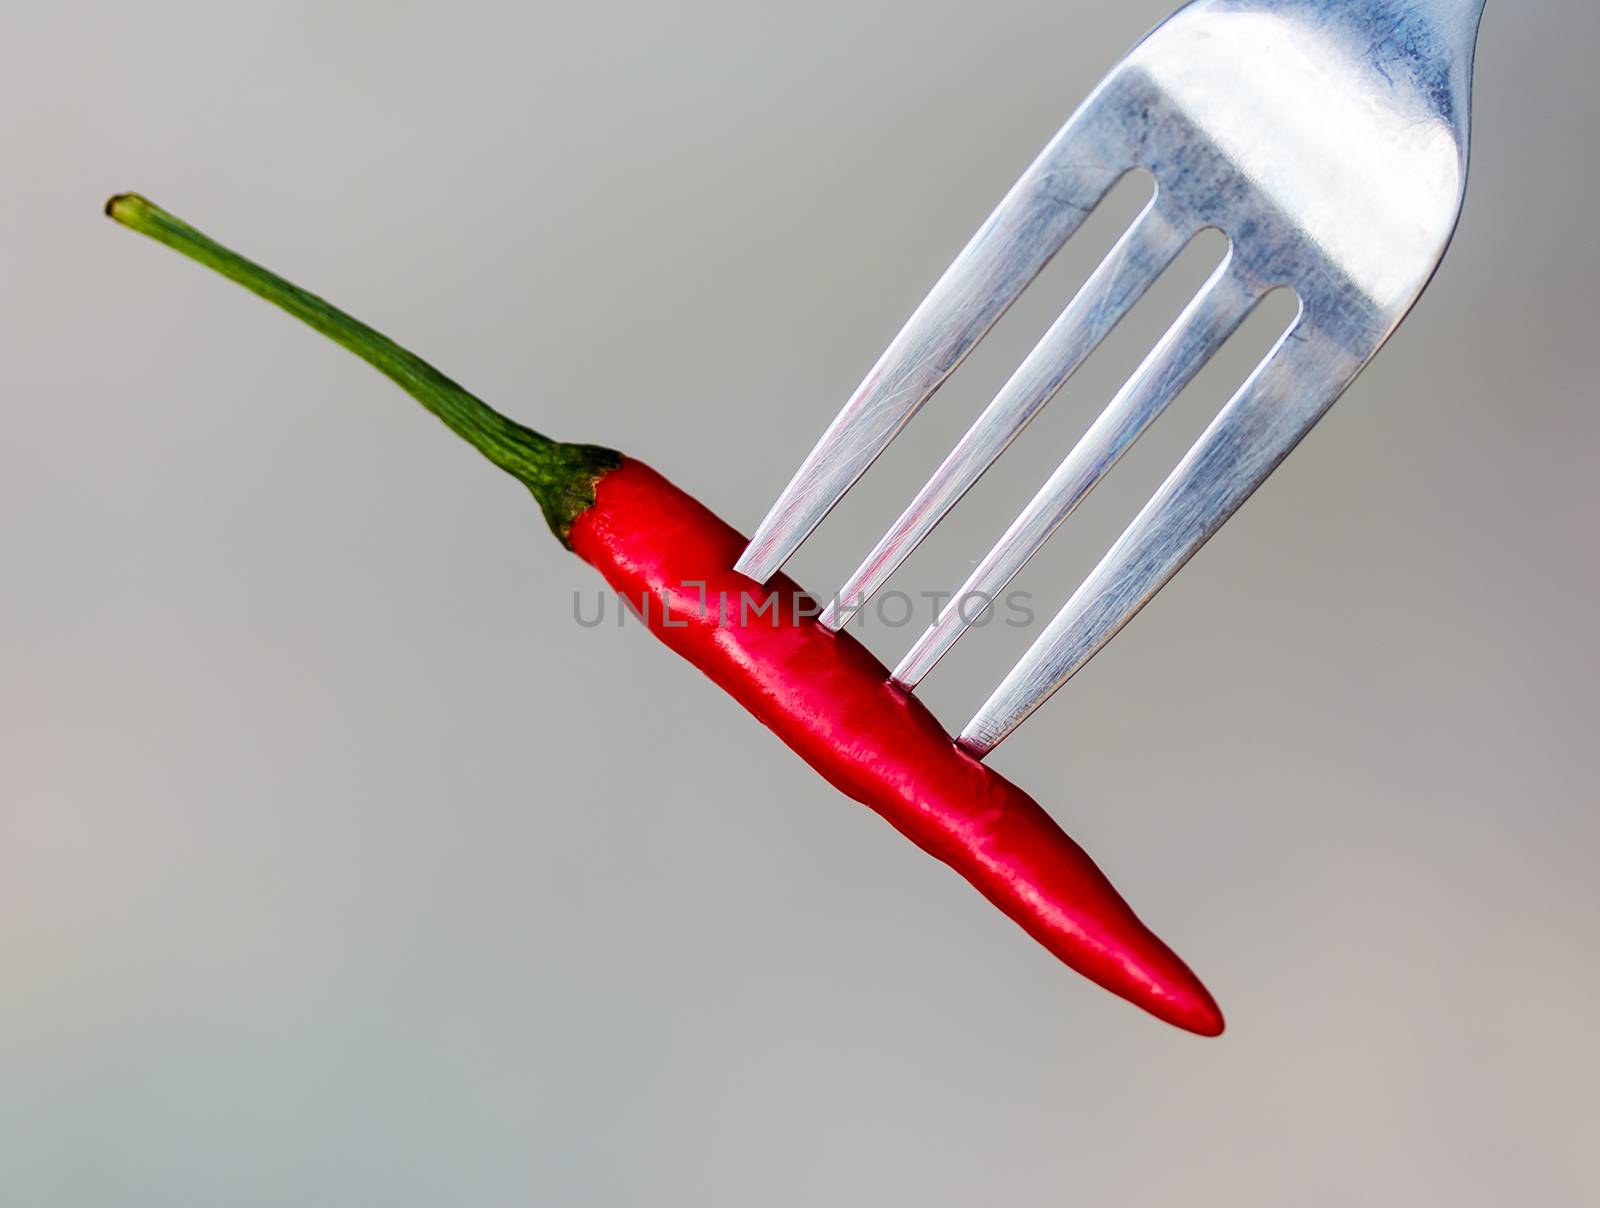 Chilli On Fork Indicates Red Pepper And Cayenne by stuartmiles